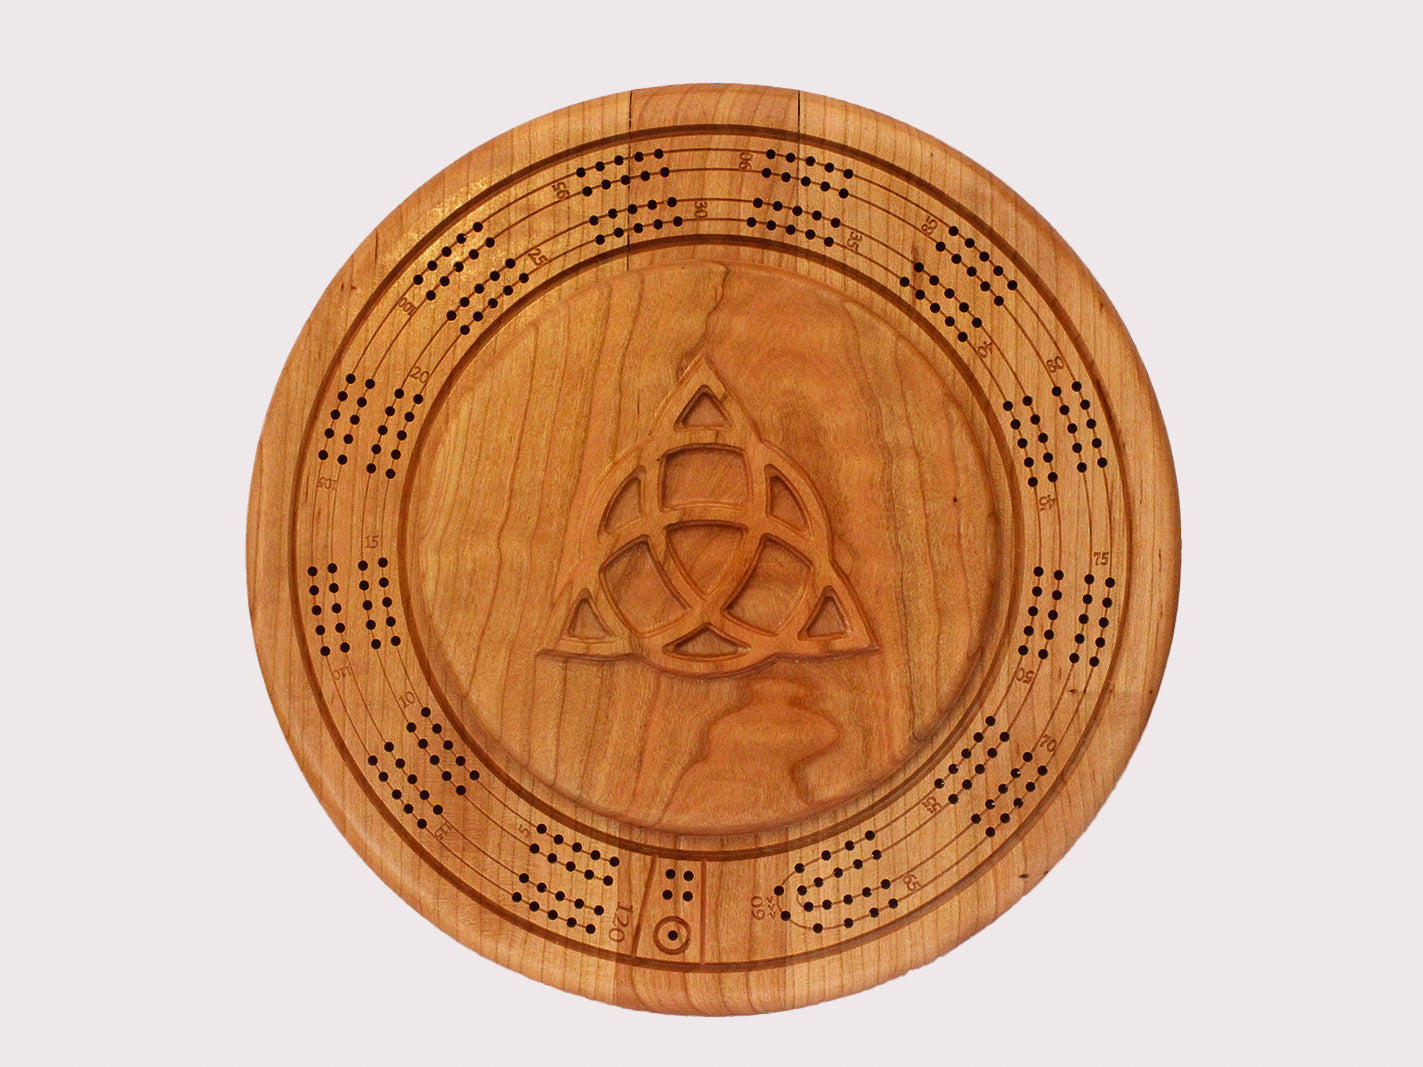 Overhead view of round cherry wood cribbage board featuring Celtic Trinity Knot design on lid of storage compartment